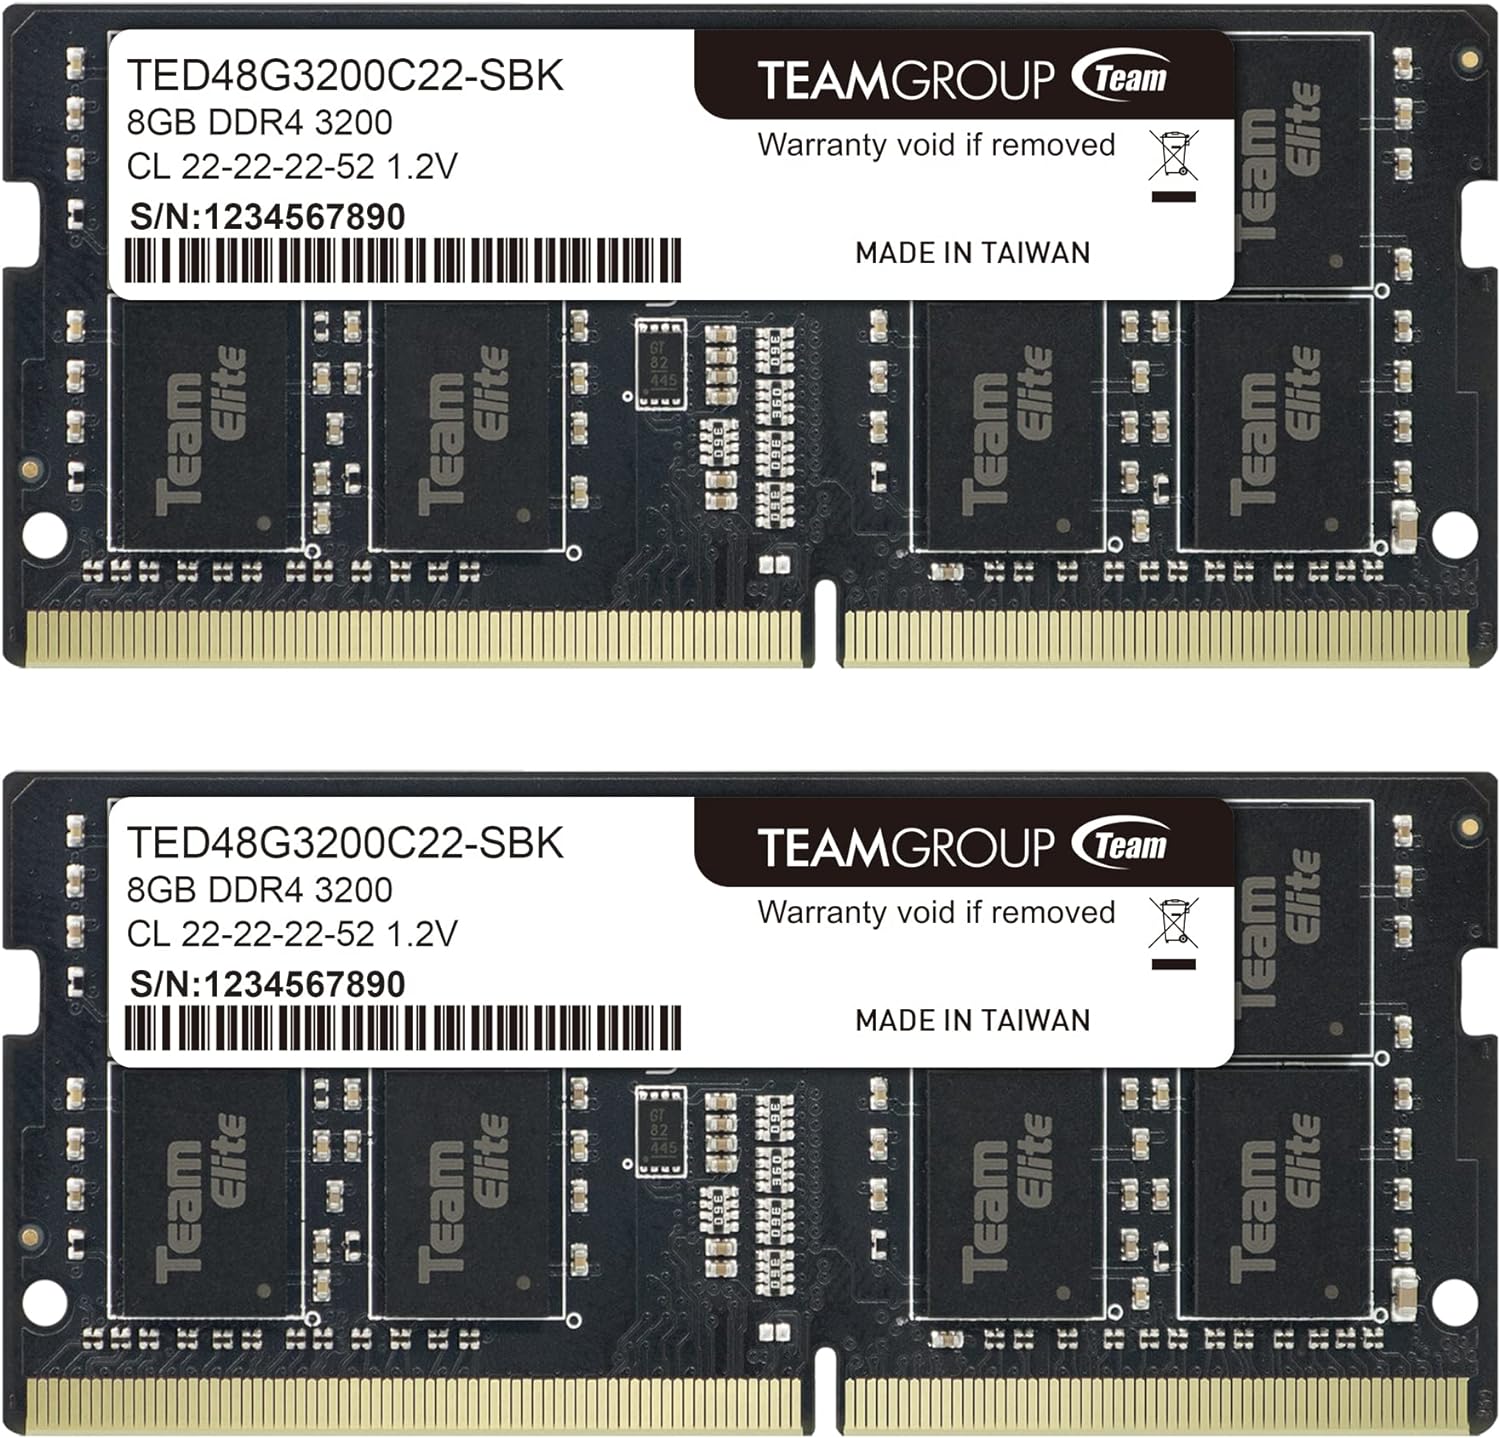 TEAMGROUP Elite DDR4 16GB Kit (2 x 8GB) 3200MHz PC4-25600 CL22 Unbuffered Non-ECC 1.2V SODIMM 260-Pin Laptop Notebook PC Computer Memory Module Ram Upgrade - TED416G3200C22DC-S01